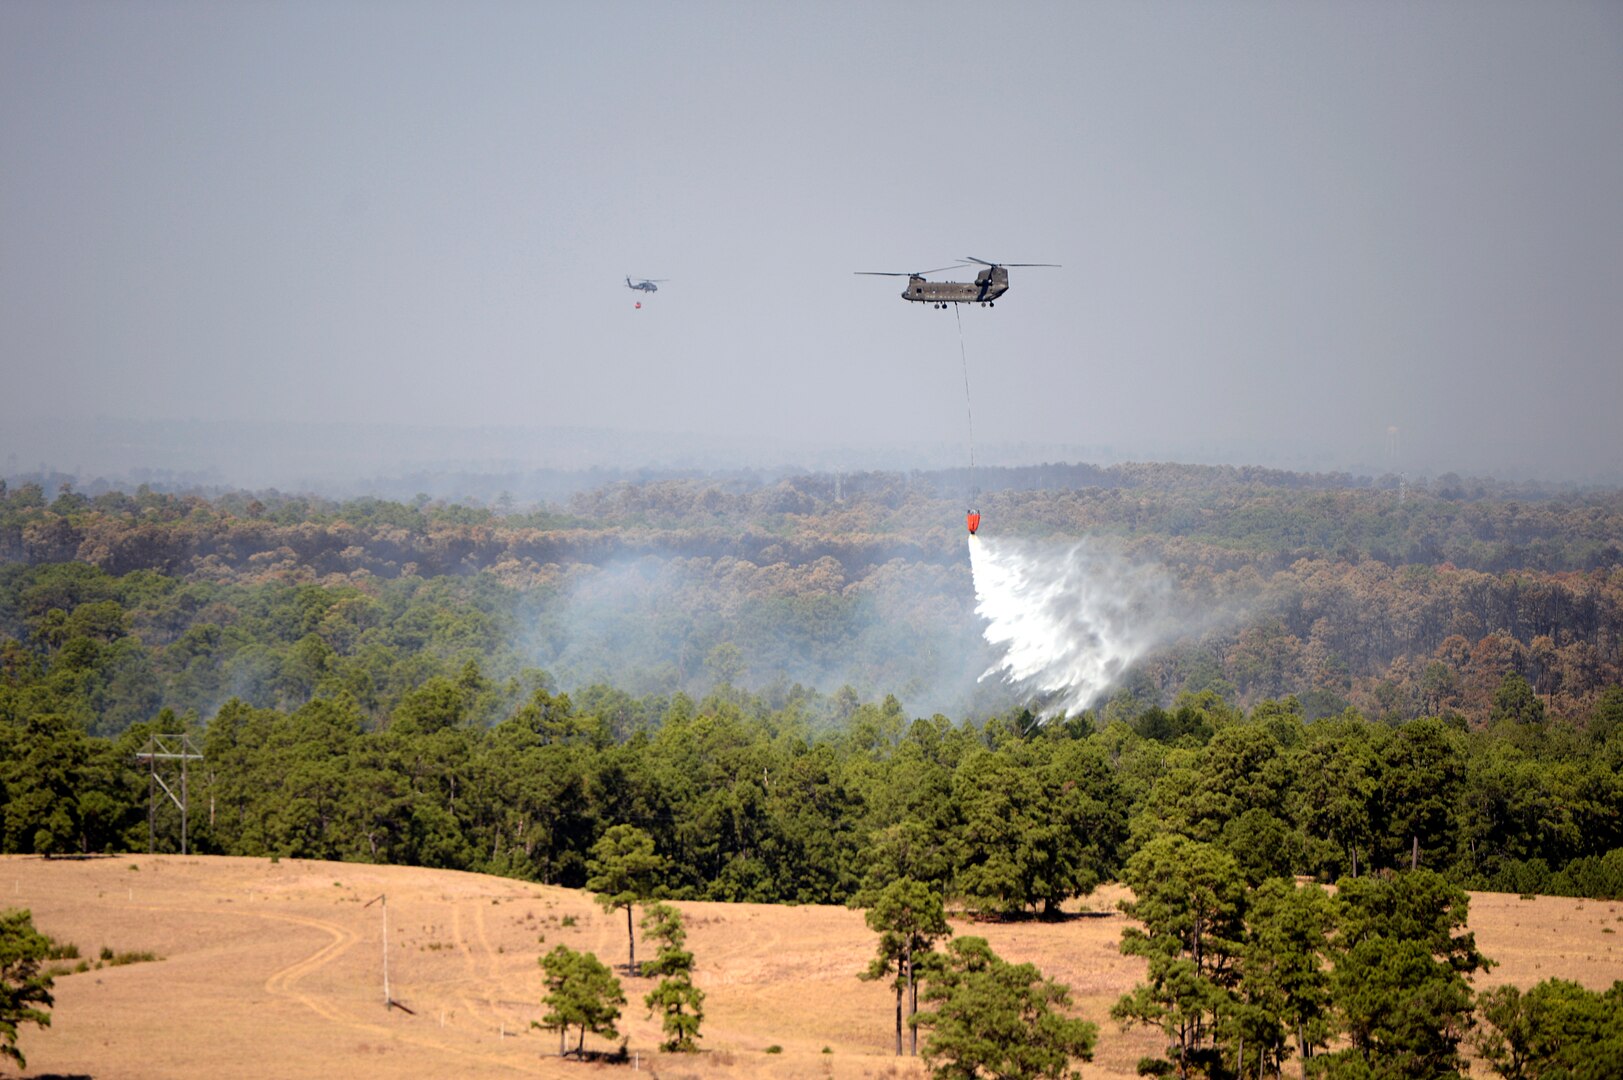 A Texas Army National Guard CH-47 Chinook from Grand Prairie and a UH-60 Black Hawk from the Austin Army Aviation Facility assist in suppressing a wildfire in Bastrop County, Texas. 